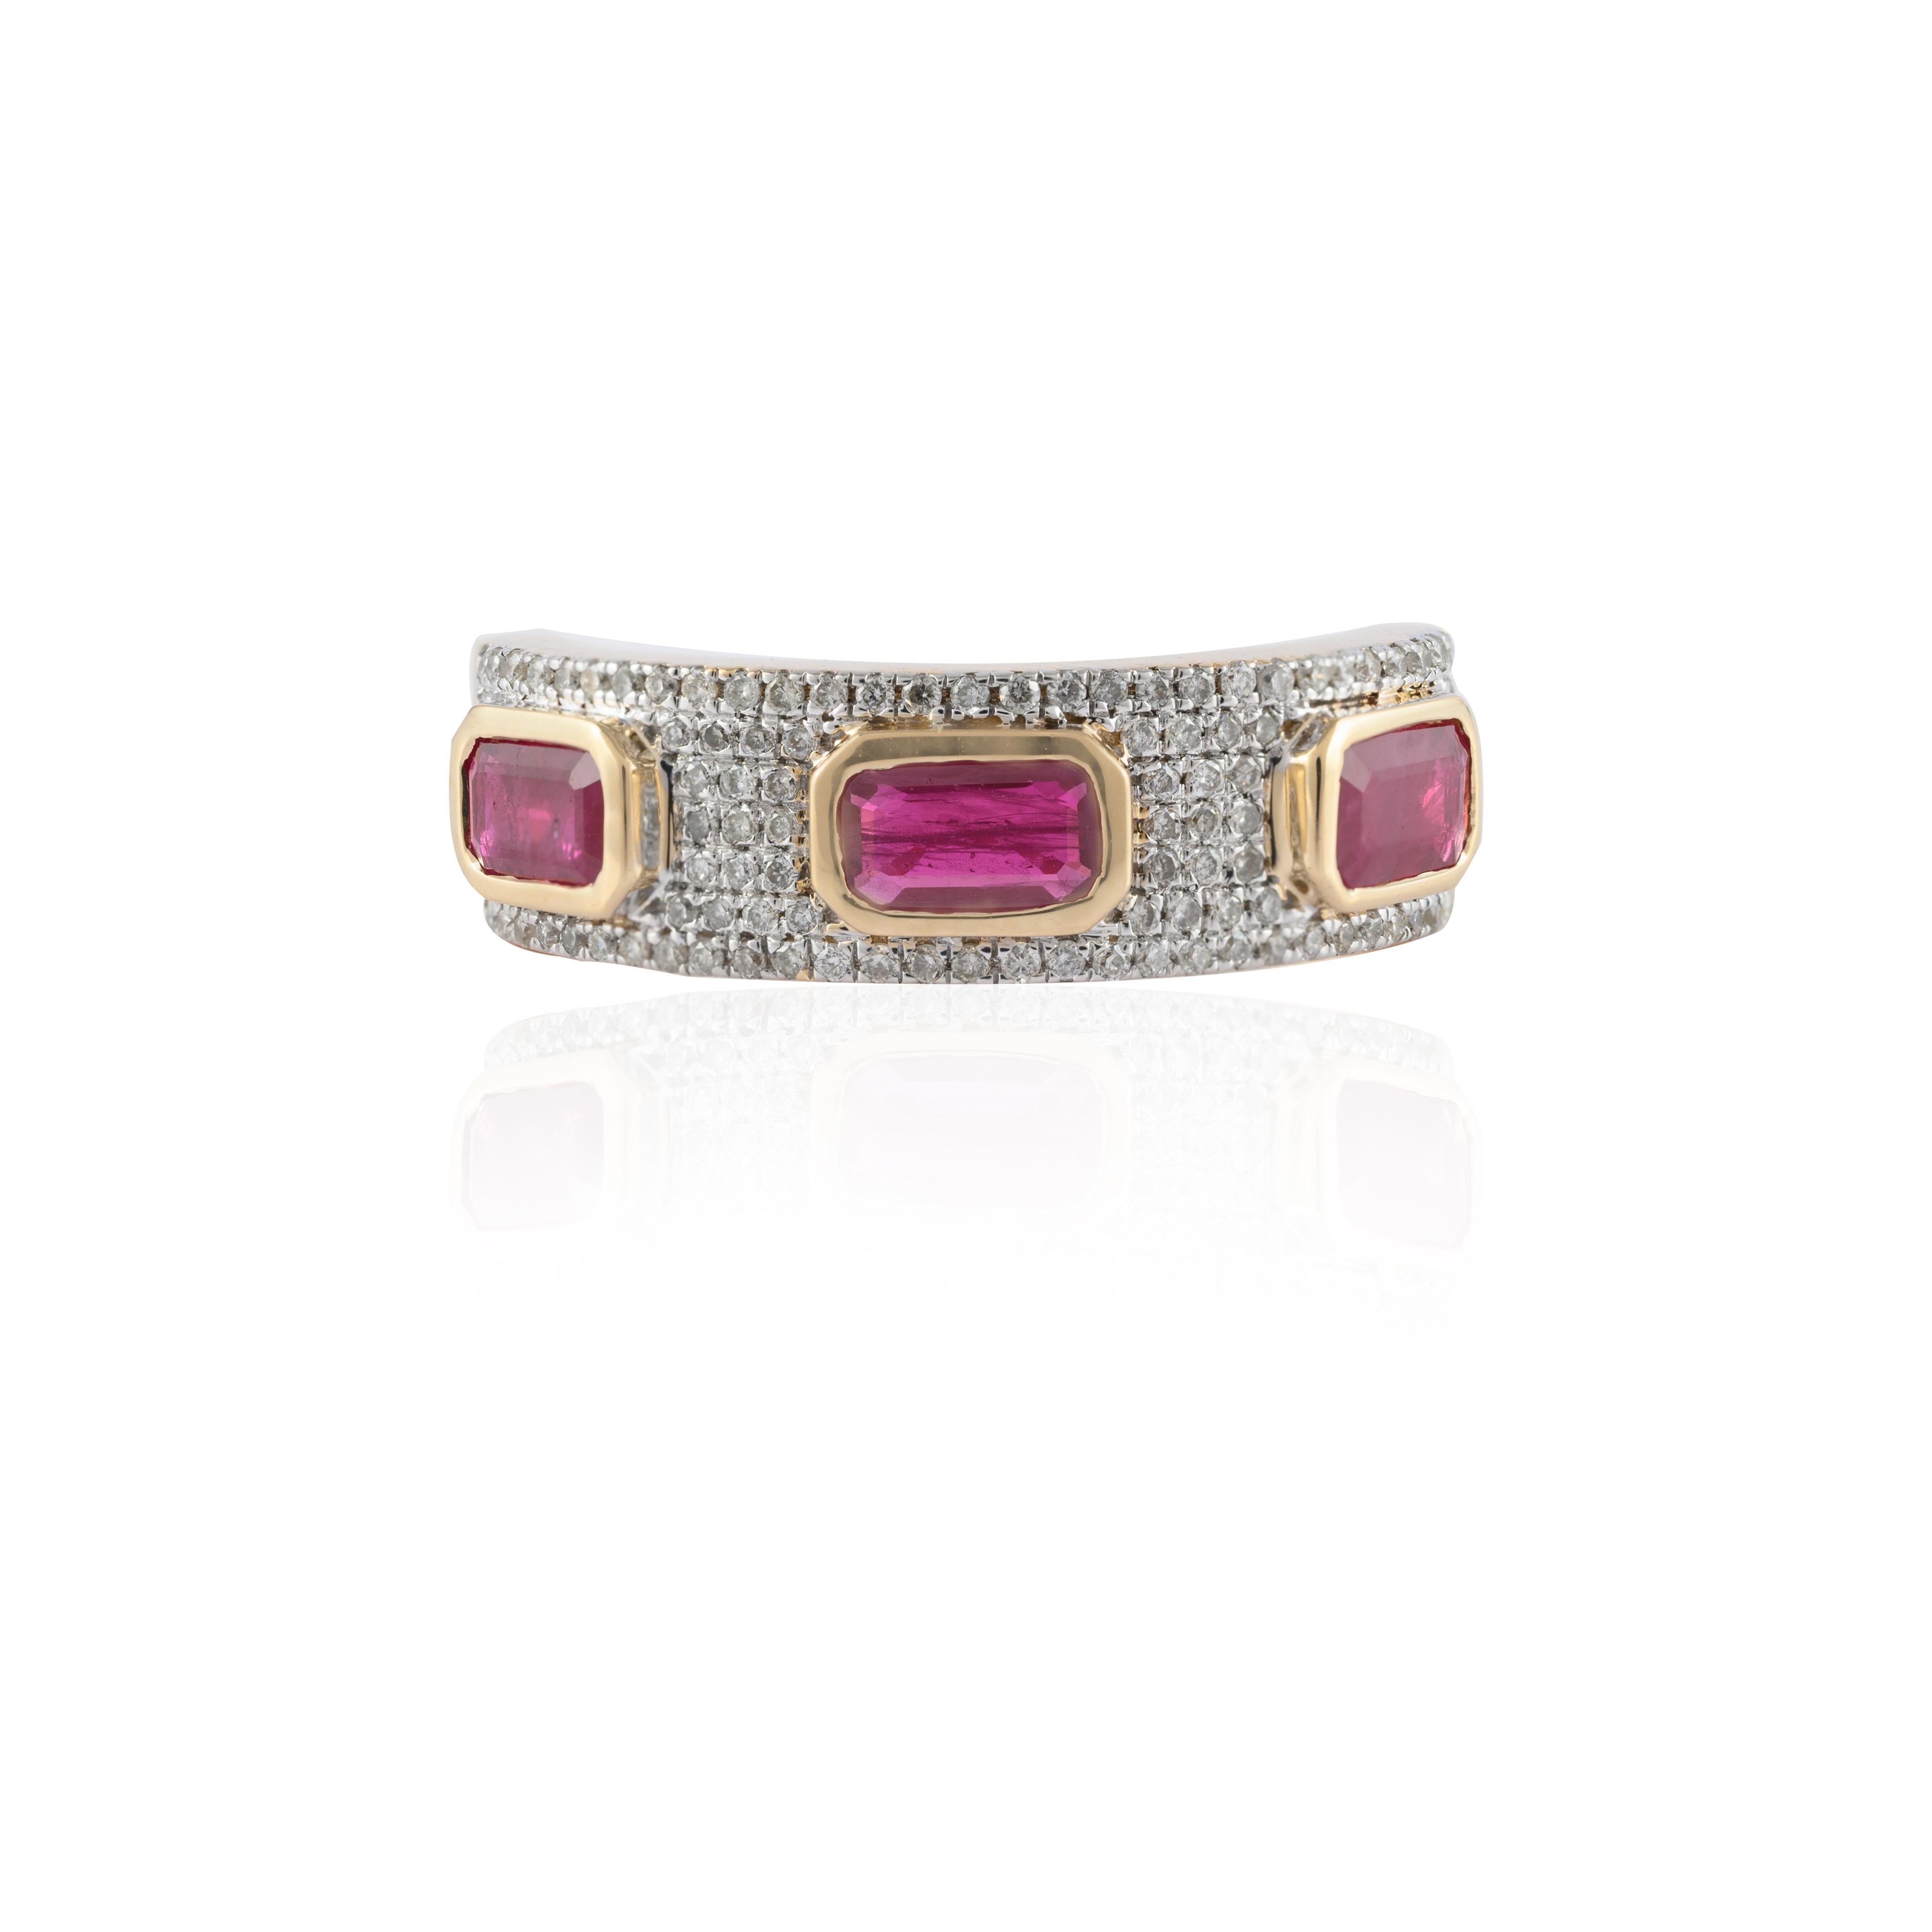 For Sale:  Statement Diamond Ruby Band Ring Gift for Him in 14k Solid Yellow Gold 2